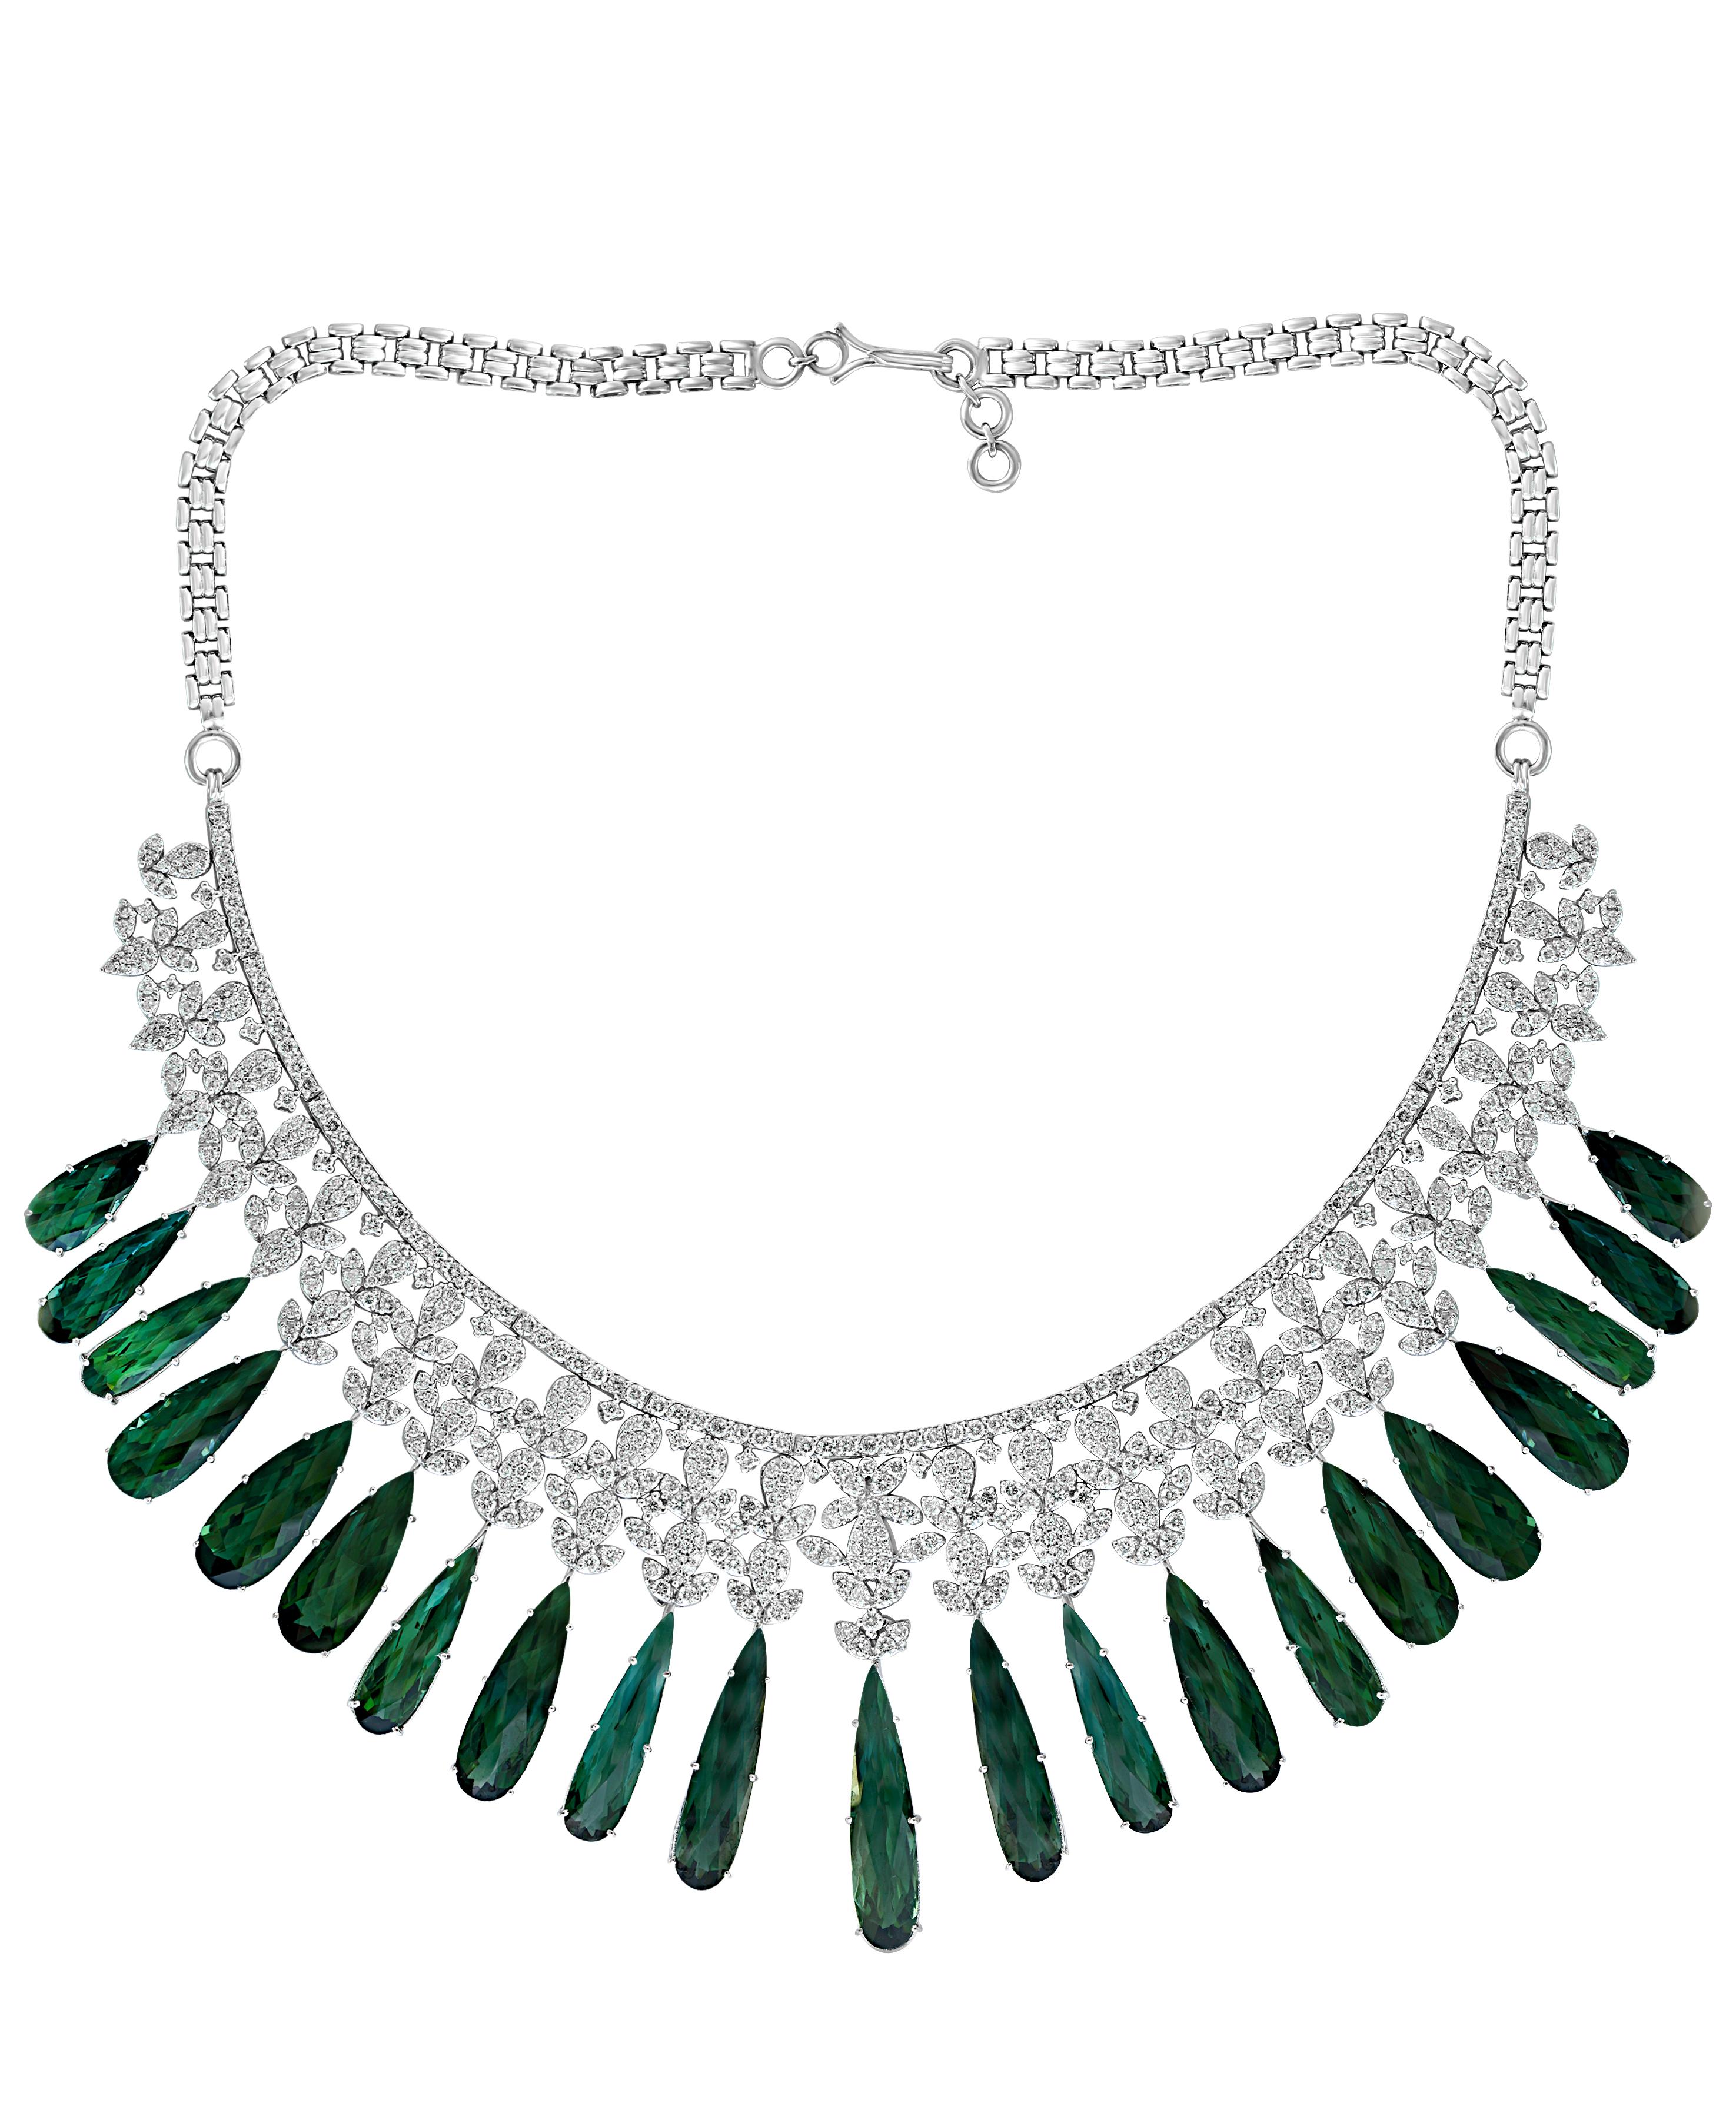 110 Carat Tear Drop Green Tourmaline & 25 Ct Diamond Necklace Suite 18 Karat white   Gold
This extraordinary Necklace is consist  of  Fine long Tear Drop natural  Green Tourmaline  weighing approximately 110 Carat with diamonds.
  There are  total 